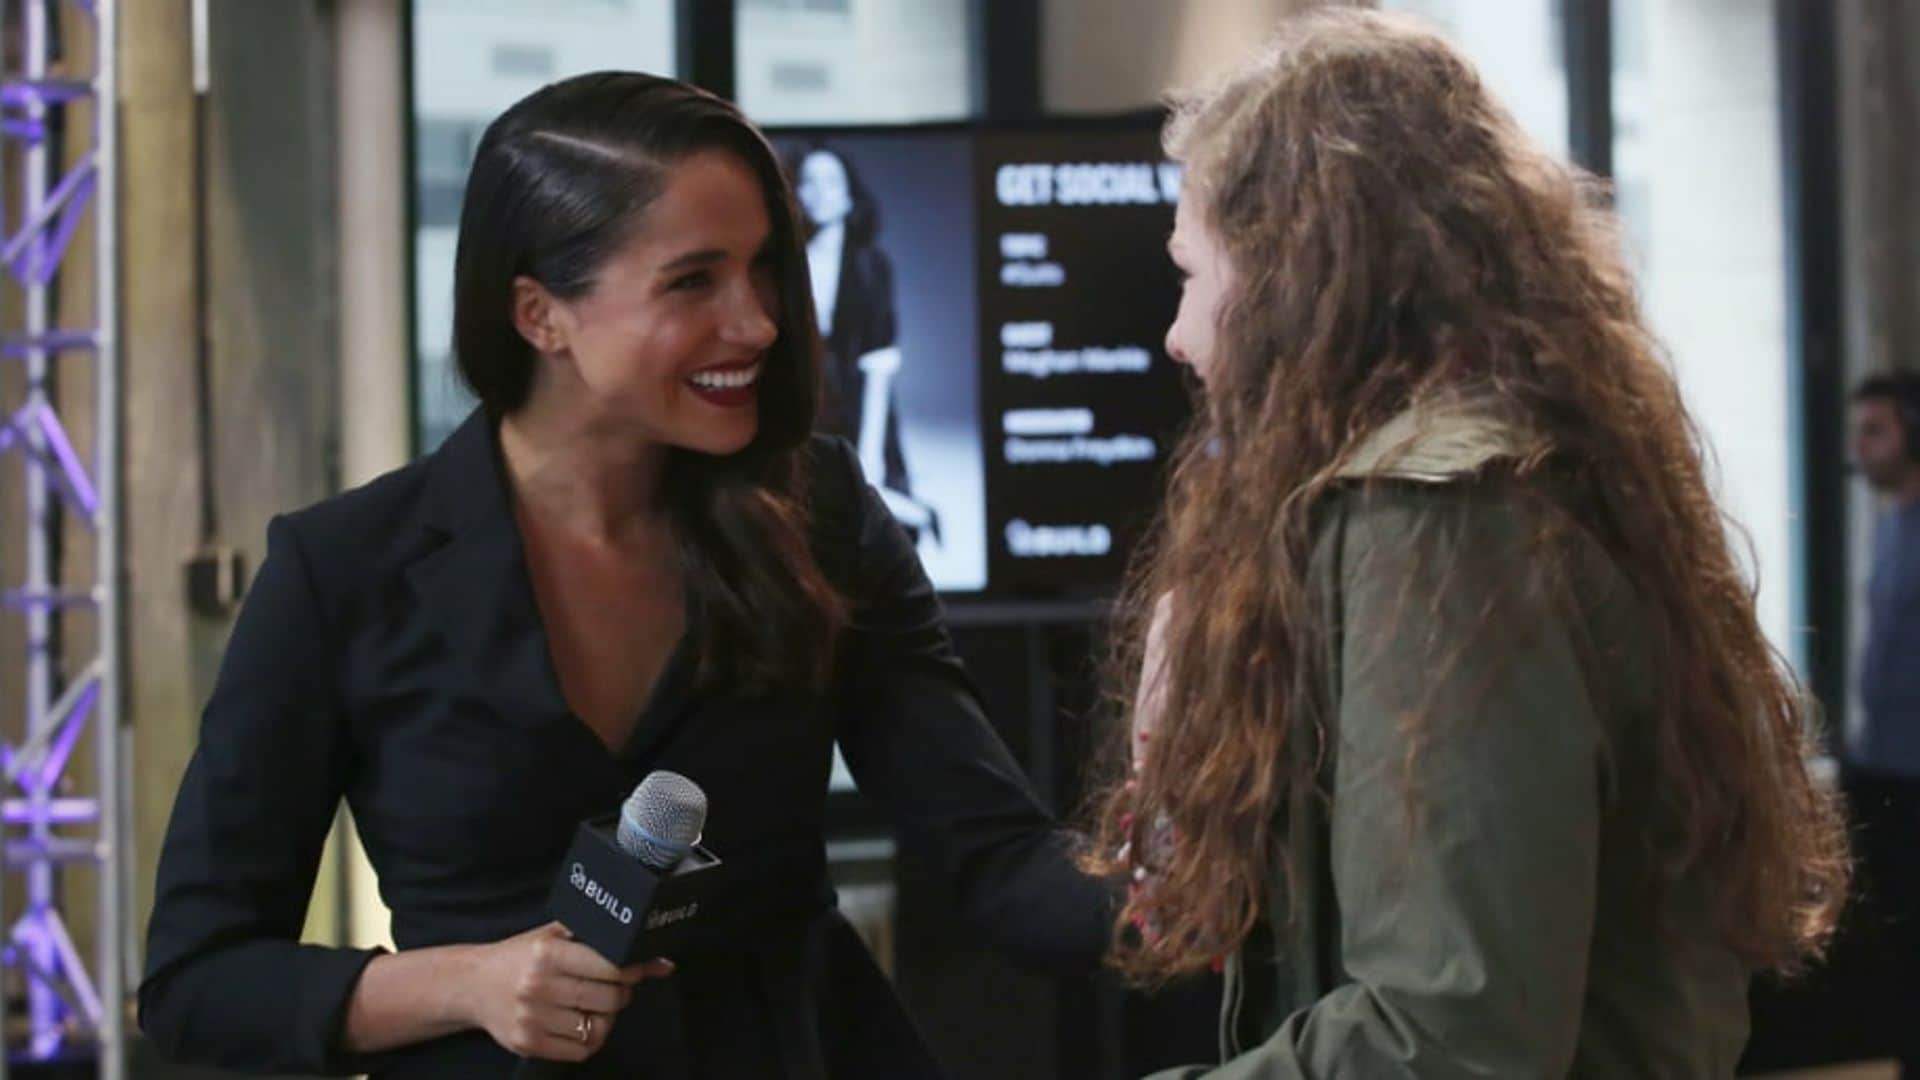 Meghan Markle goes above and beyond to change a fan's life and their interaction has us teary-eyed!